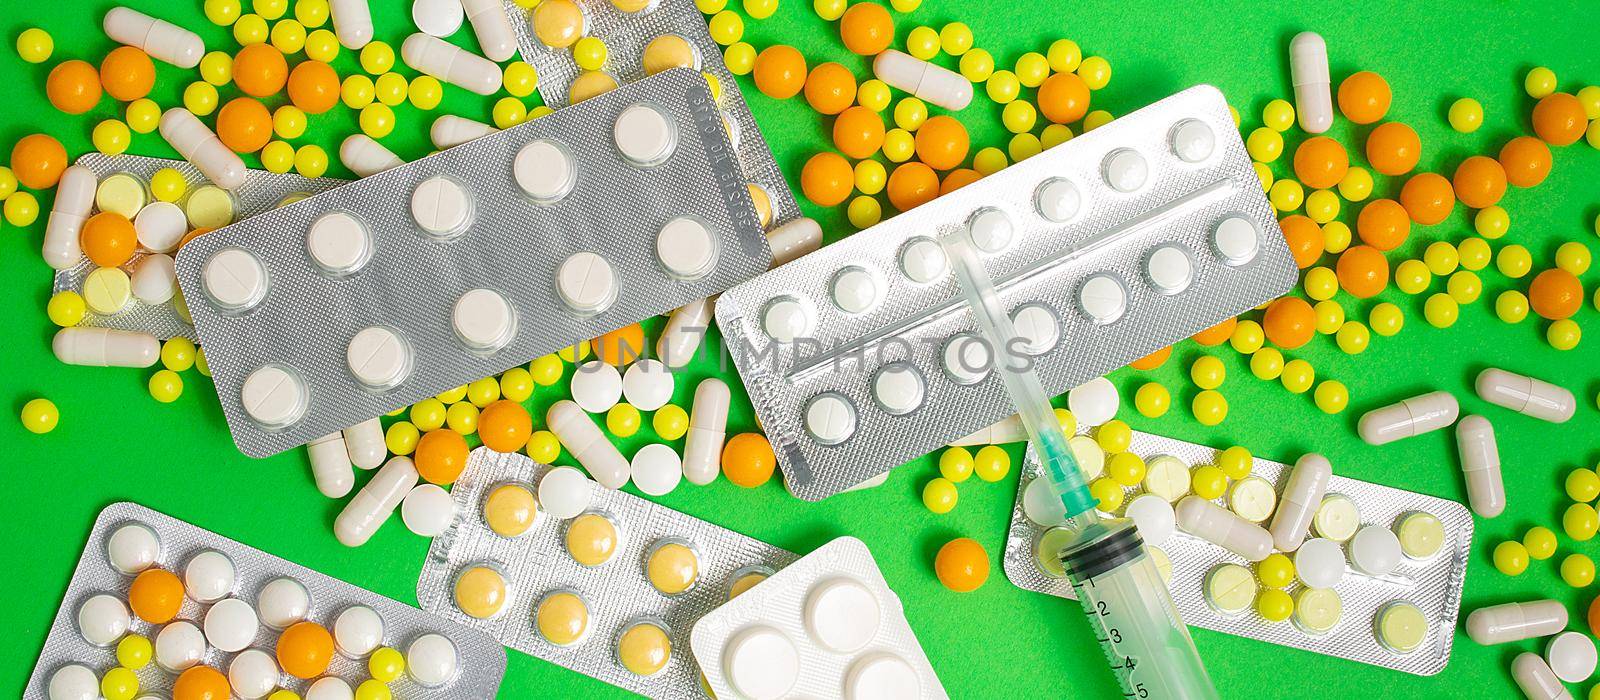 colorful and white pills, capsules, syringe. Prevention, cure of influenza, coronavirus, covid-19. yellow, orange vitamins, tablets on green background. medical healthcare, protection concept banner